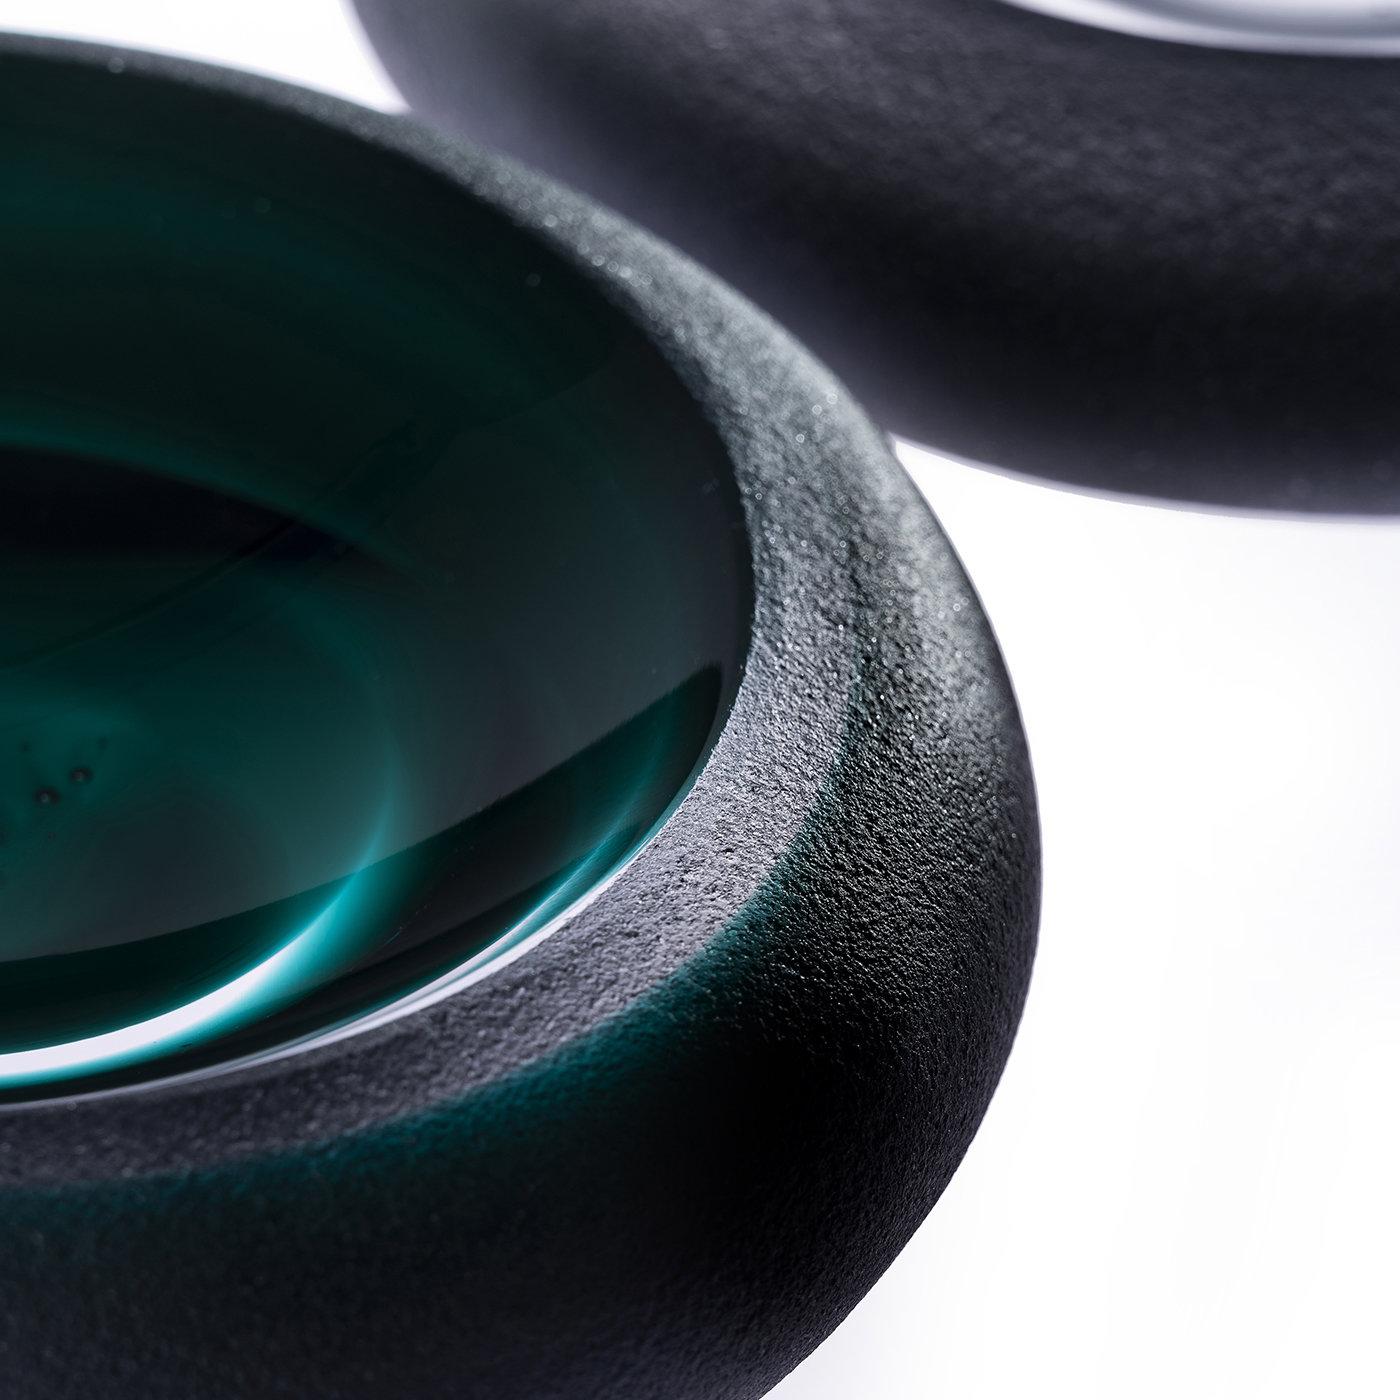 The Iride Sand Ashtray in Emerald Green features coarse sandblasting on the outer surface for a unique finish. Almost resembling an eye in its design, the Iride collection is comprised of three different circular models, all crafted with alternating